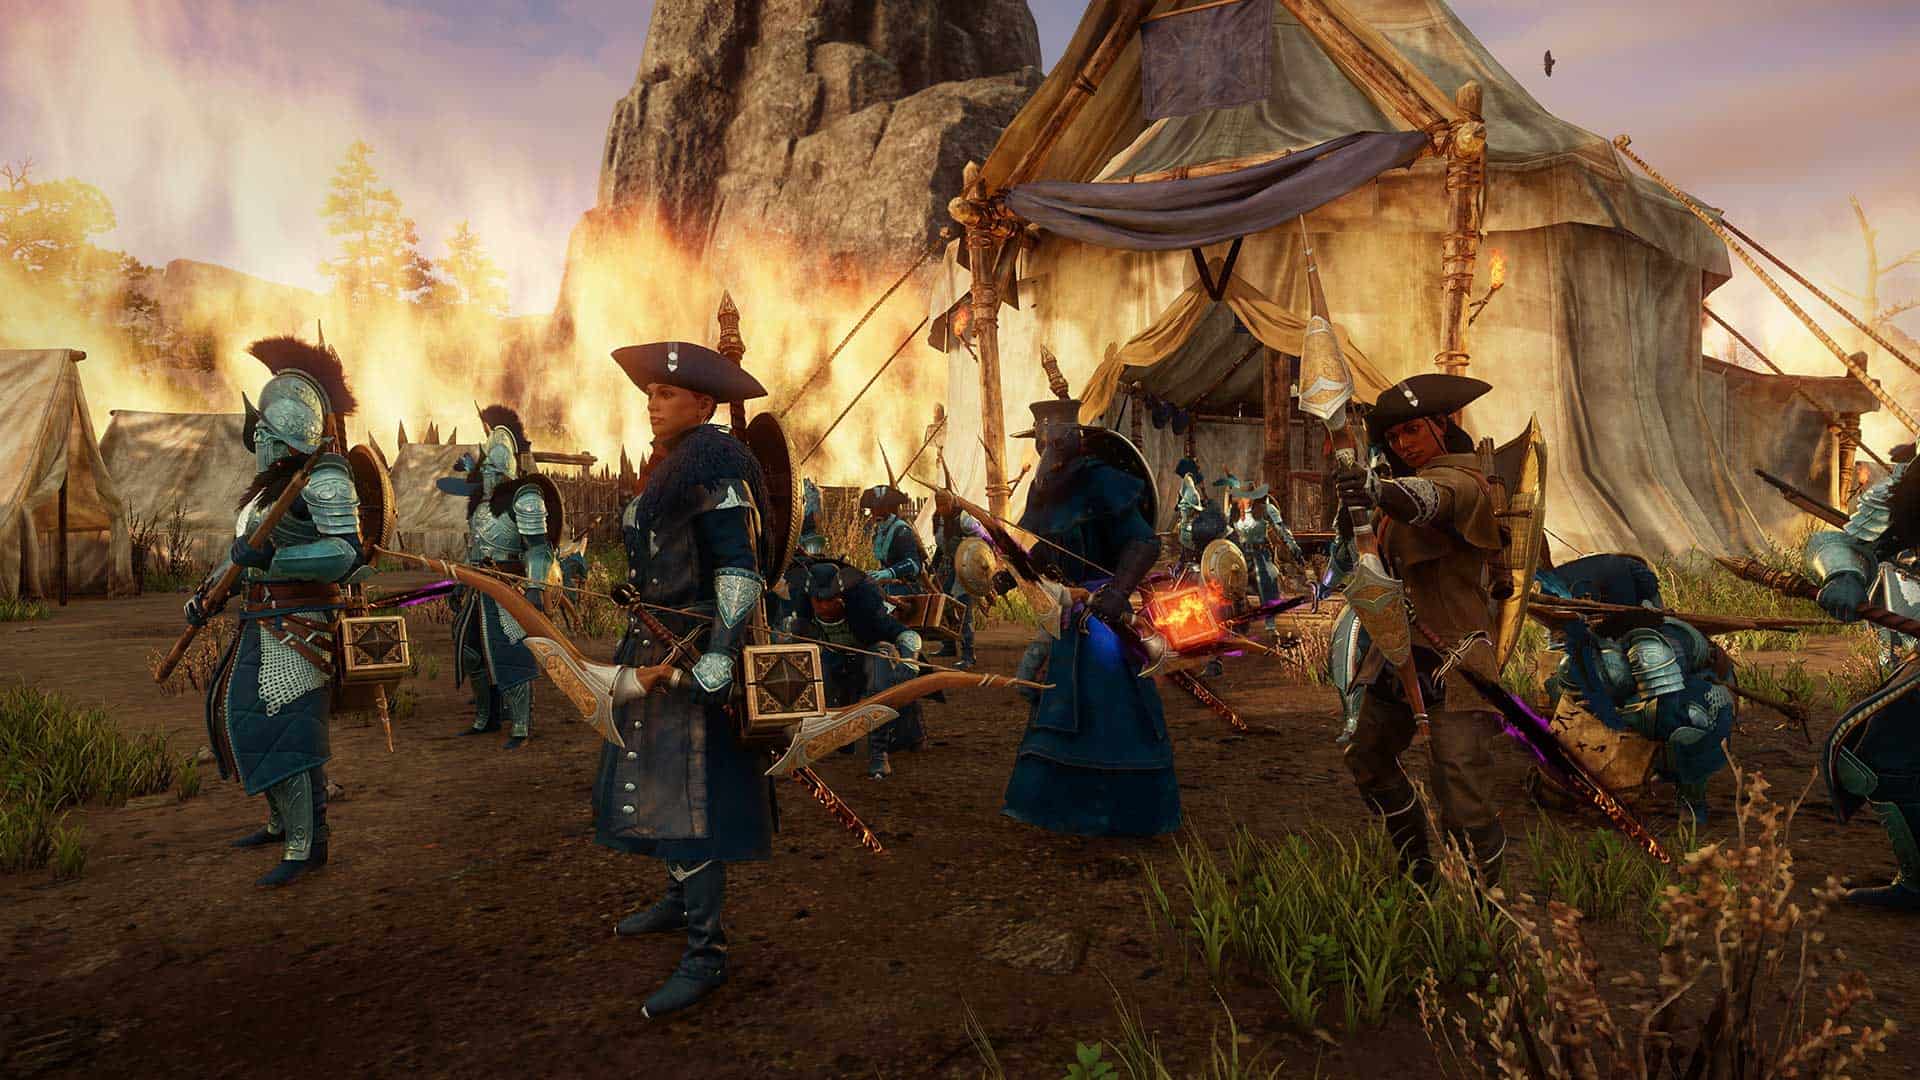 Amazon Demos First Look At MMORPG New Worlds Frantic 50v50 Objective Based War Mode